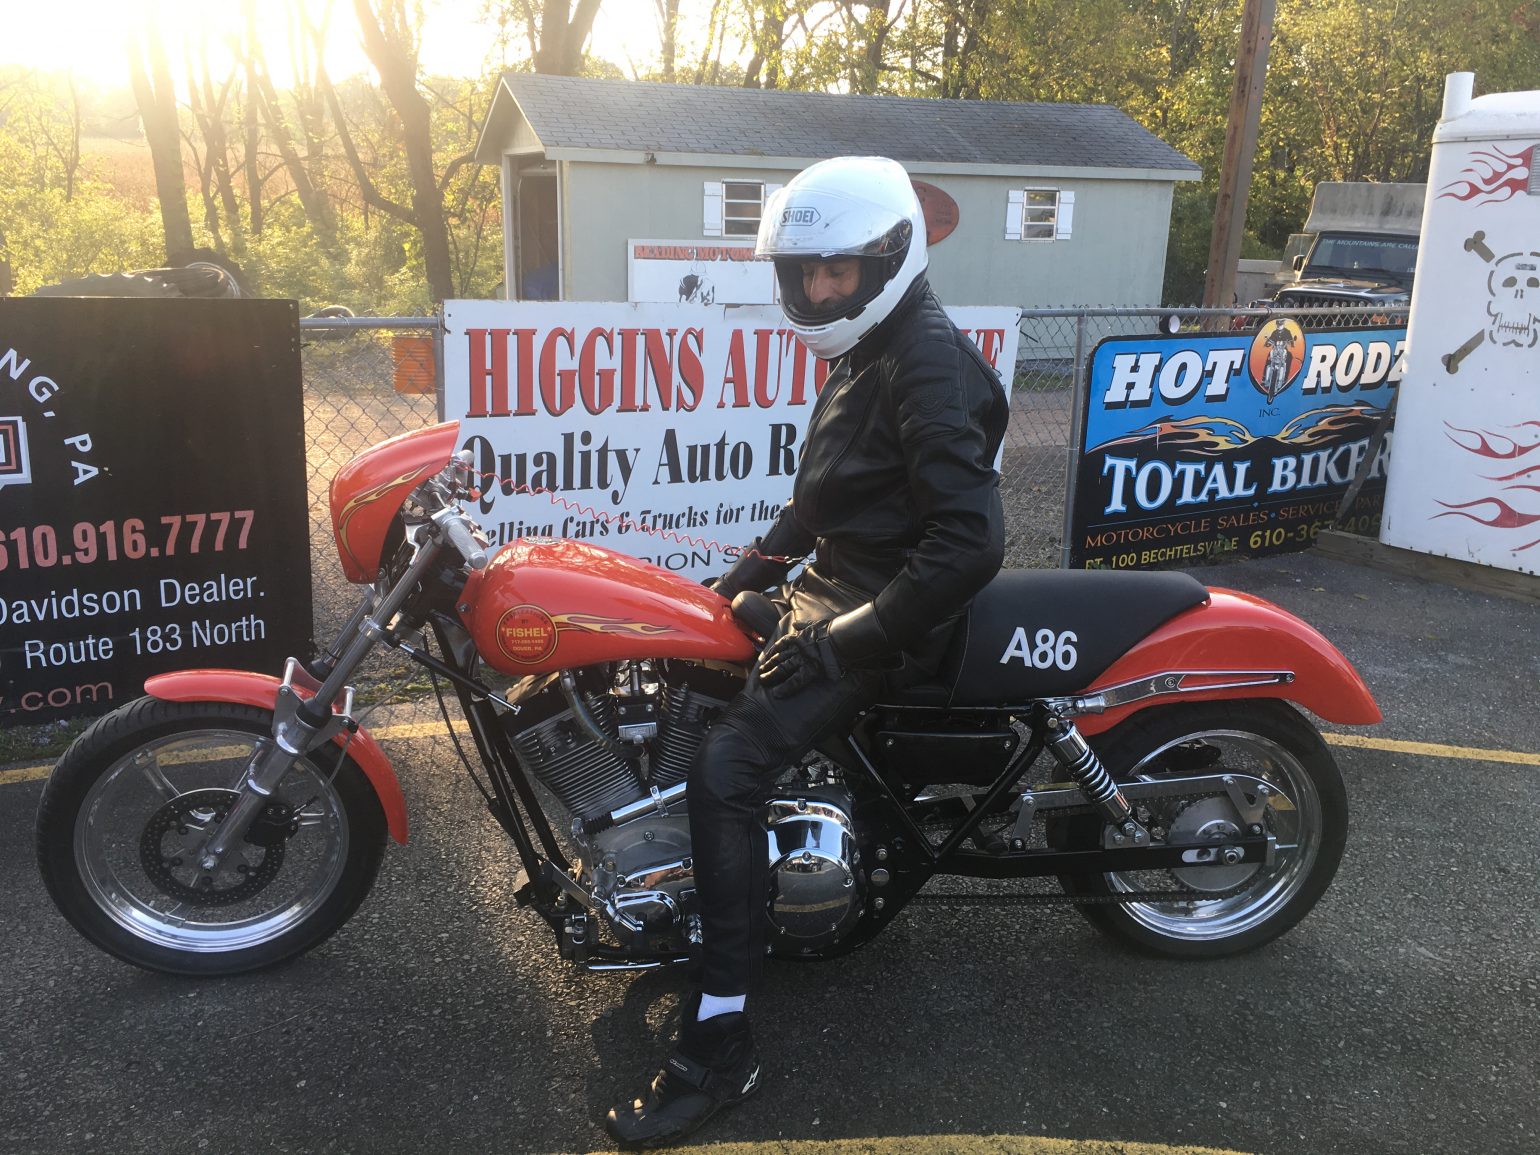 480-Foot Reading Motorcycle Club Race Coverage, Jr. Dragbikes and More